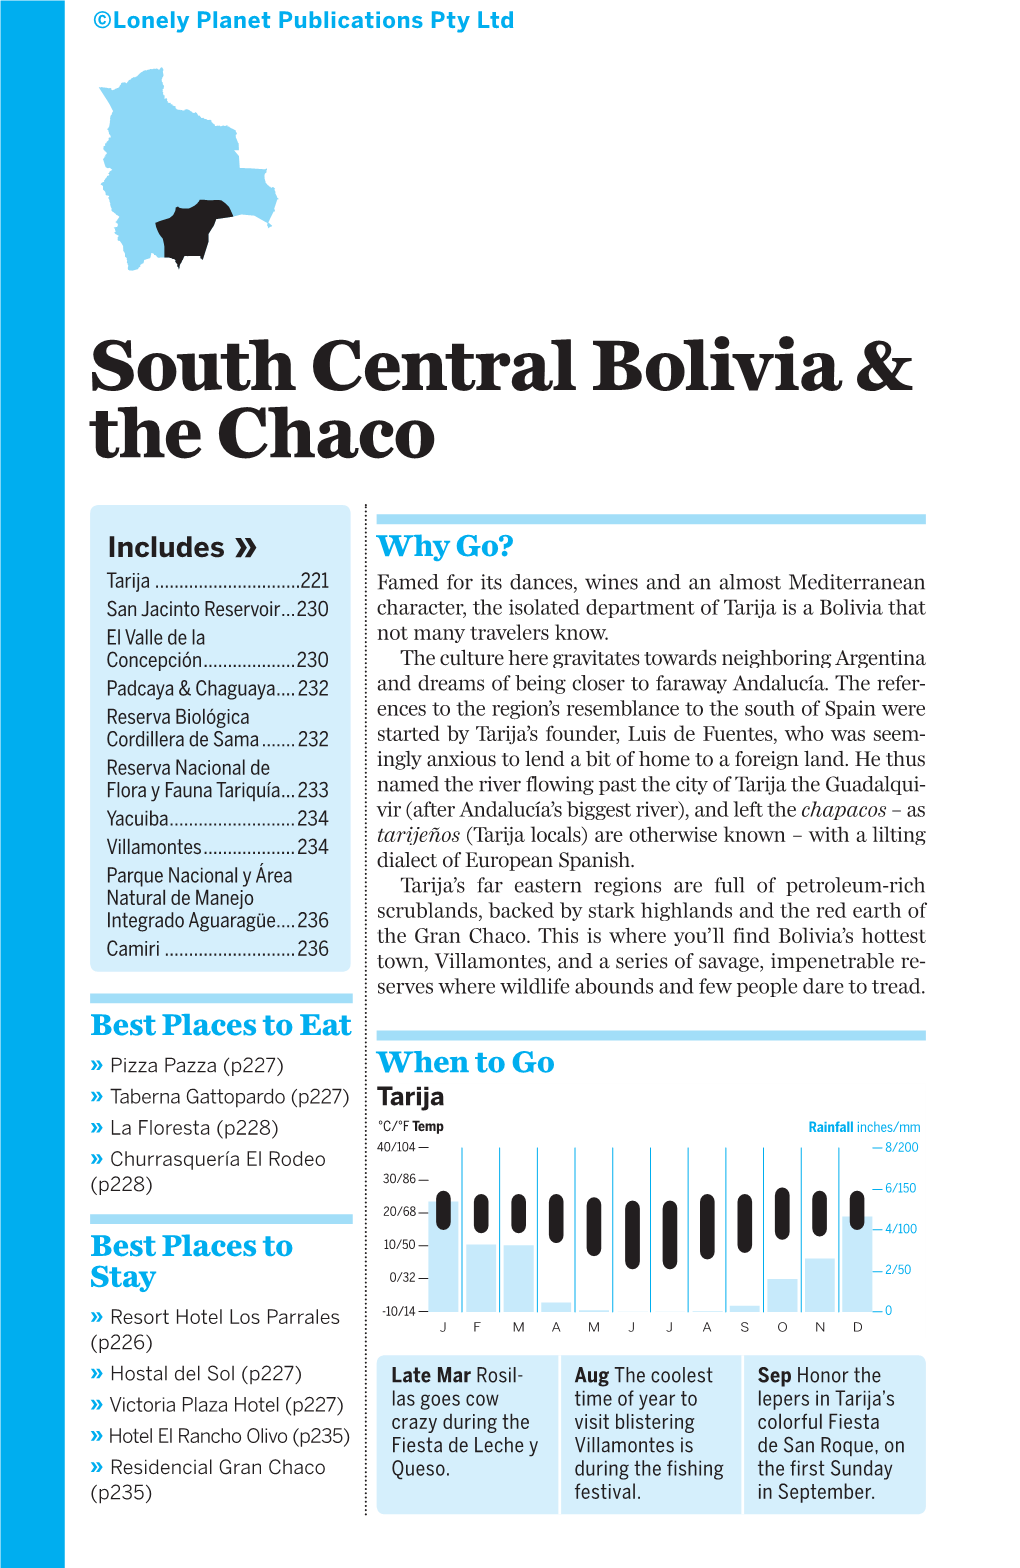 South Central Bolivia & the Chaco